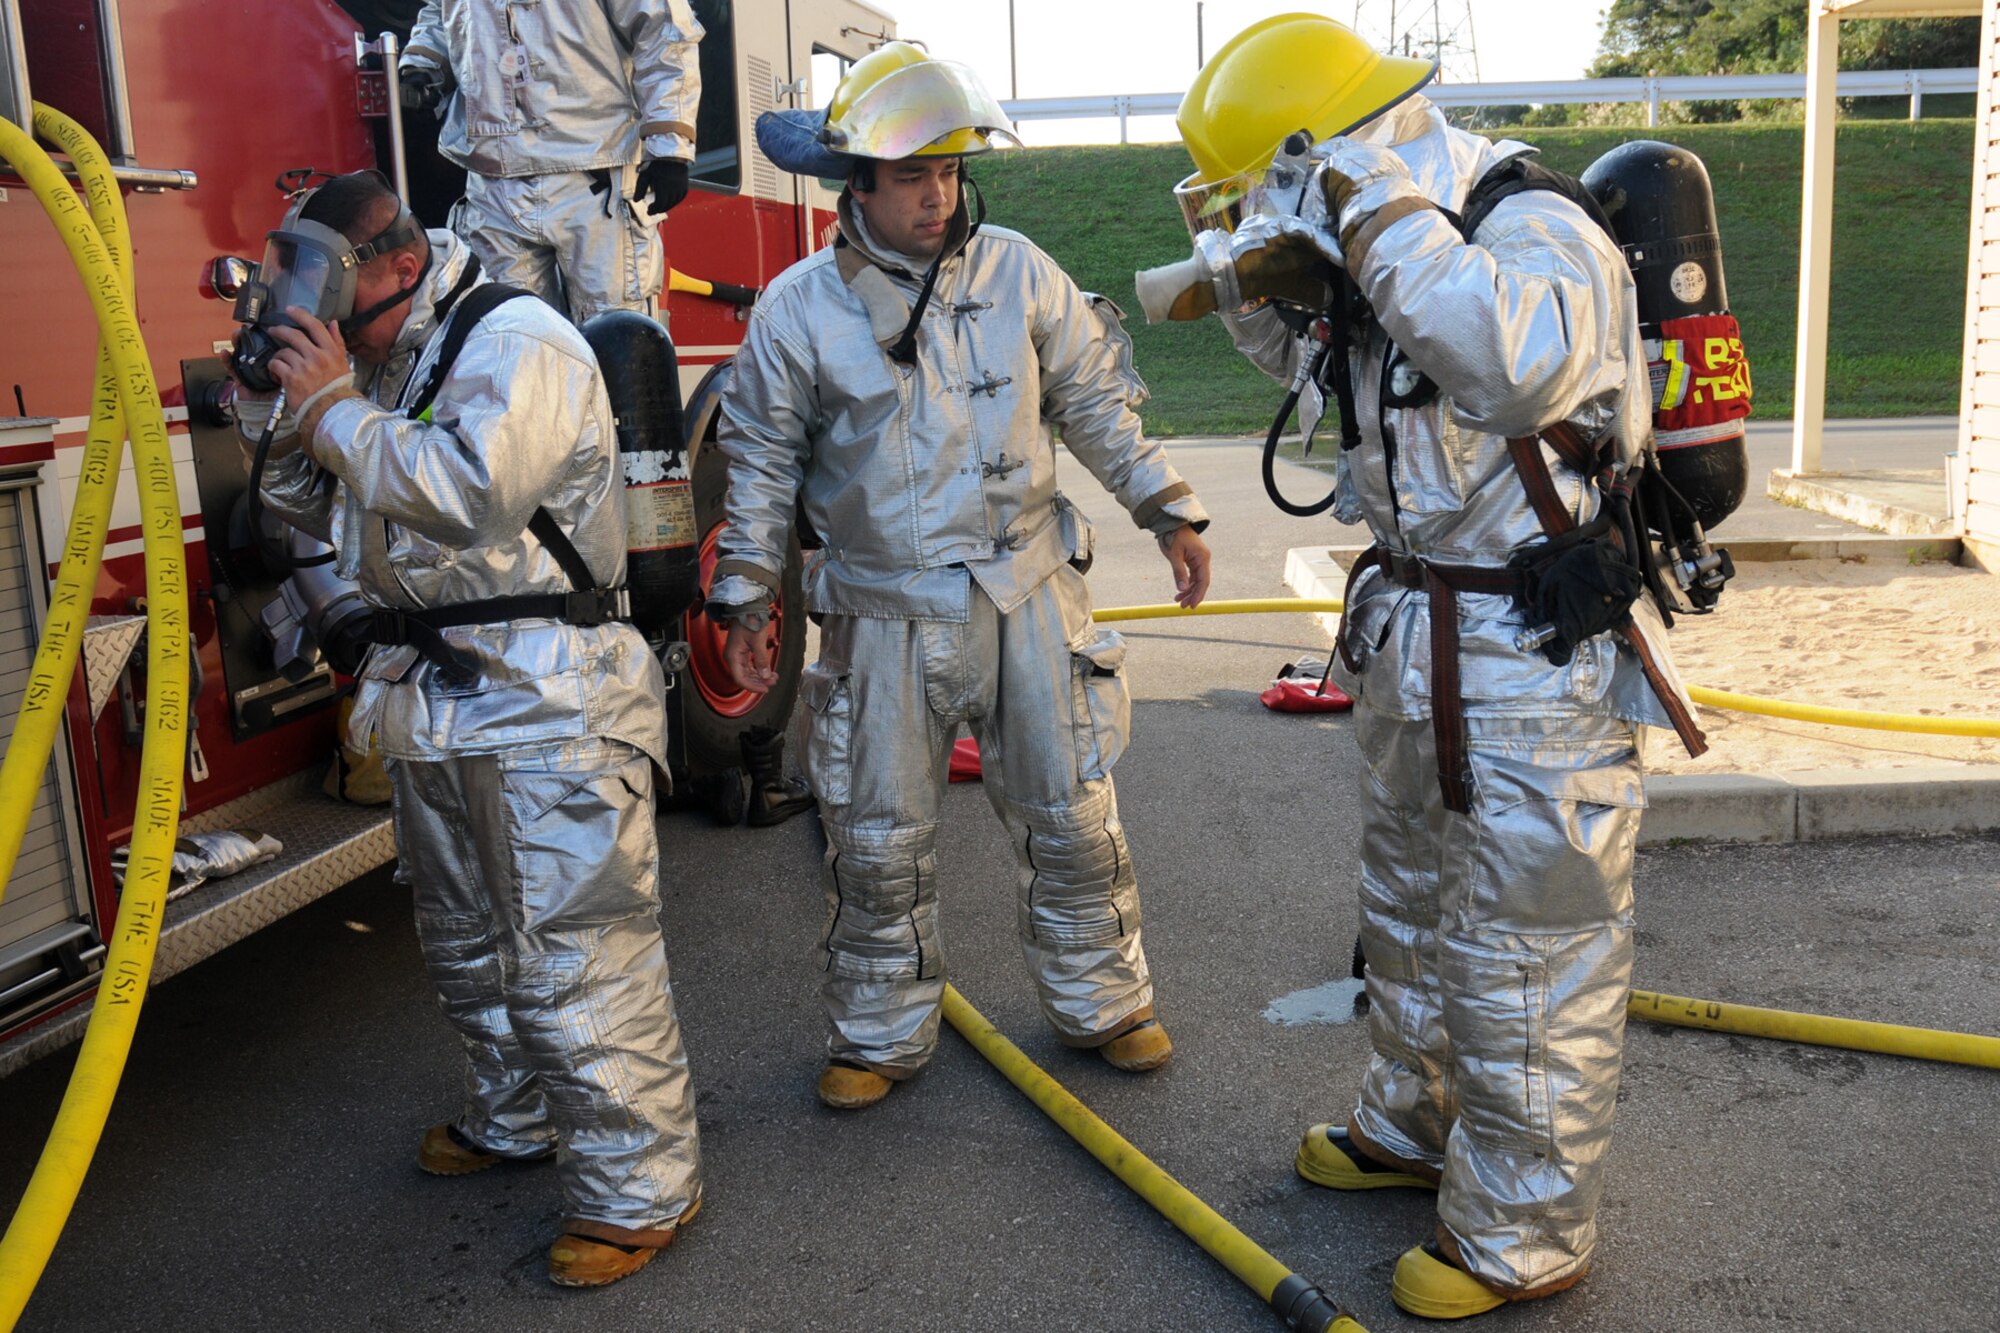 Staff Sgt. John Garcia (left), Airmen 1st Class David Moncayo (center) and Vincent Kinard, all from the 18th Civil Engineering Squadron Fire Department, remove their gear after putting out a simulated kitchen fire at the Silver Flag Training Facility Dec. 2 at Kadena Air Base. The 18th Wing is participating in a Local Operational Readiness Exercise to test the readiness of Kadena Airmen.(U.S. Air Force photo/Airman 1st Class Amanda Grabiec)